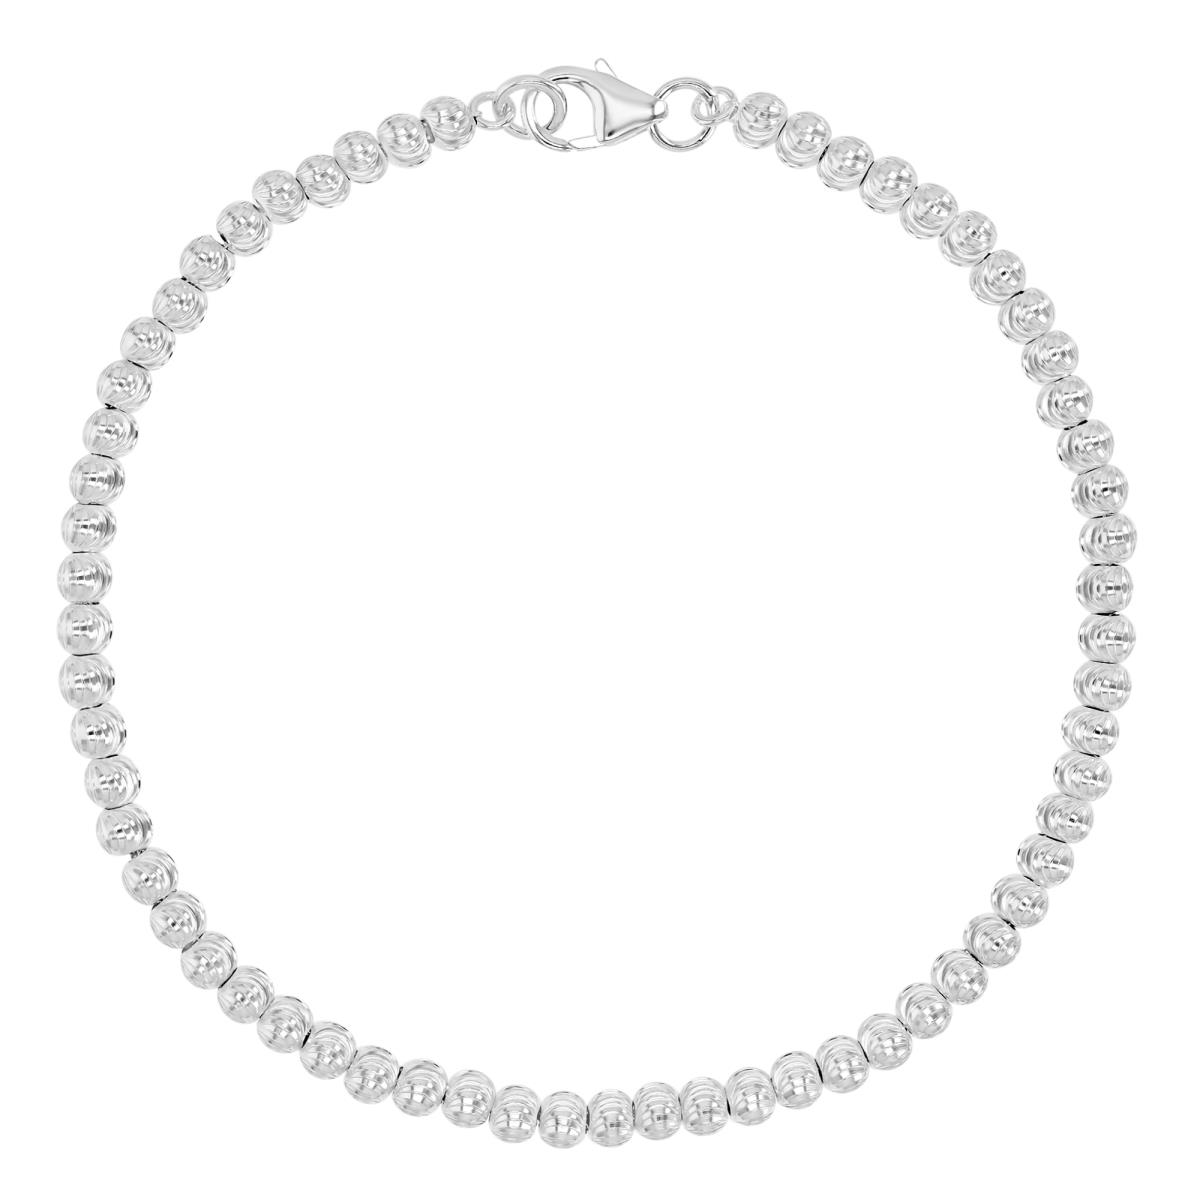 Sterling Silver Anti-Tarnish 3MM Polished & Diamond Cut Bead 7" Chain Necklace